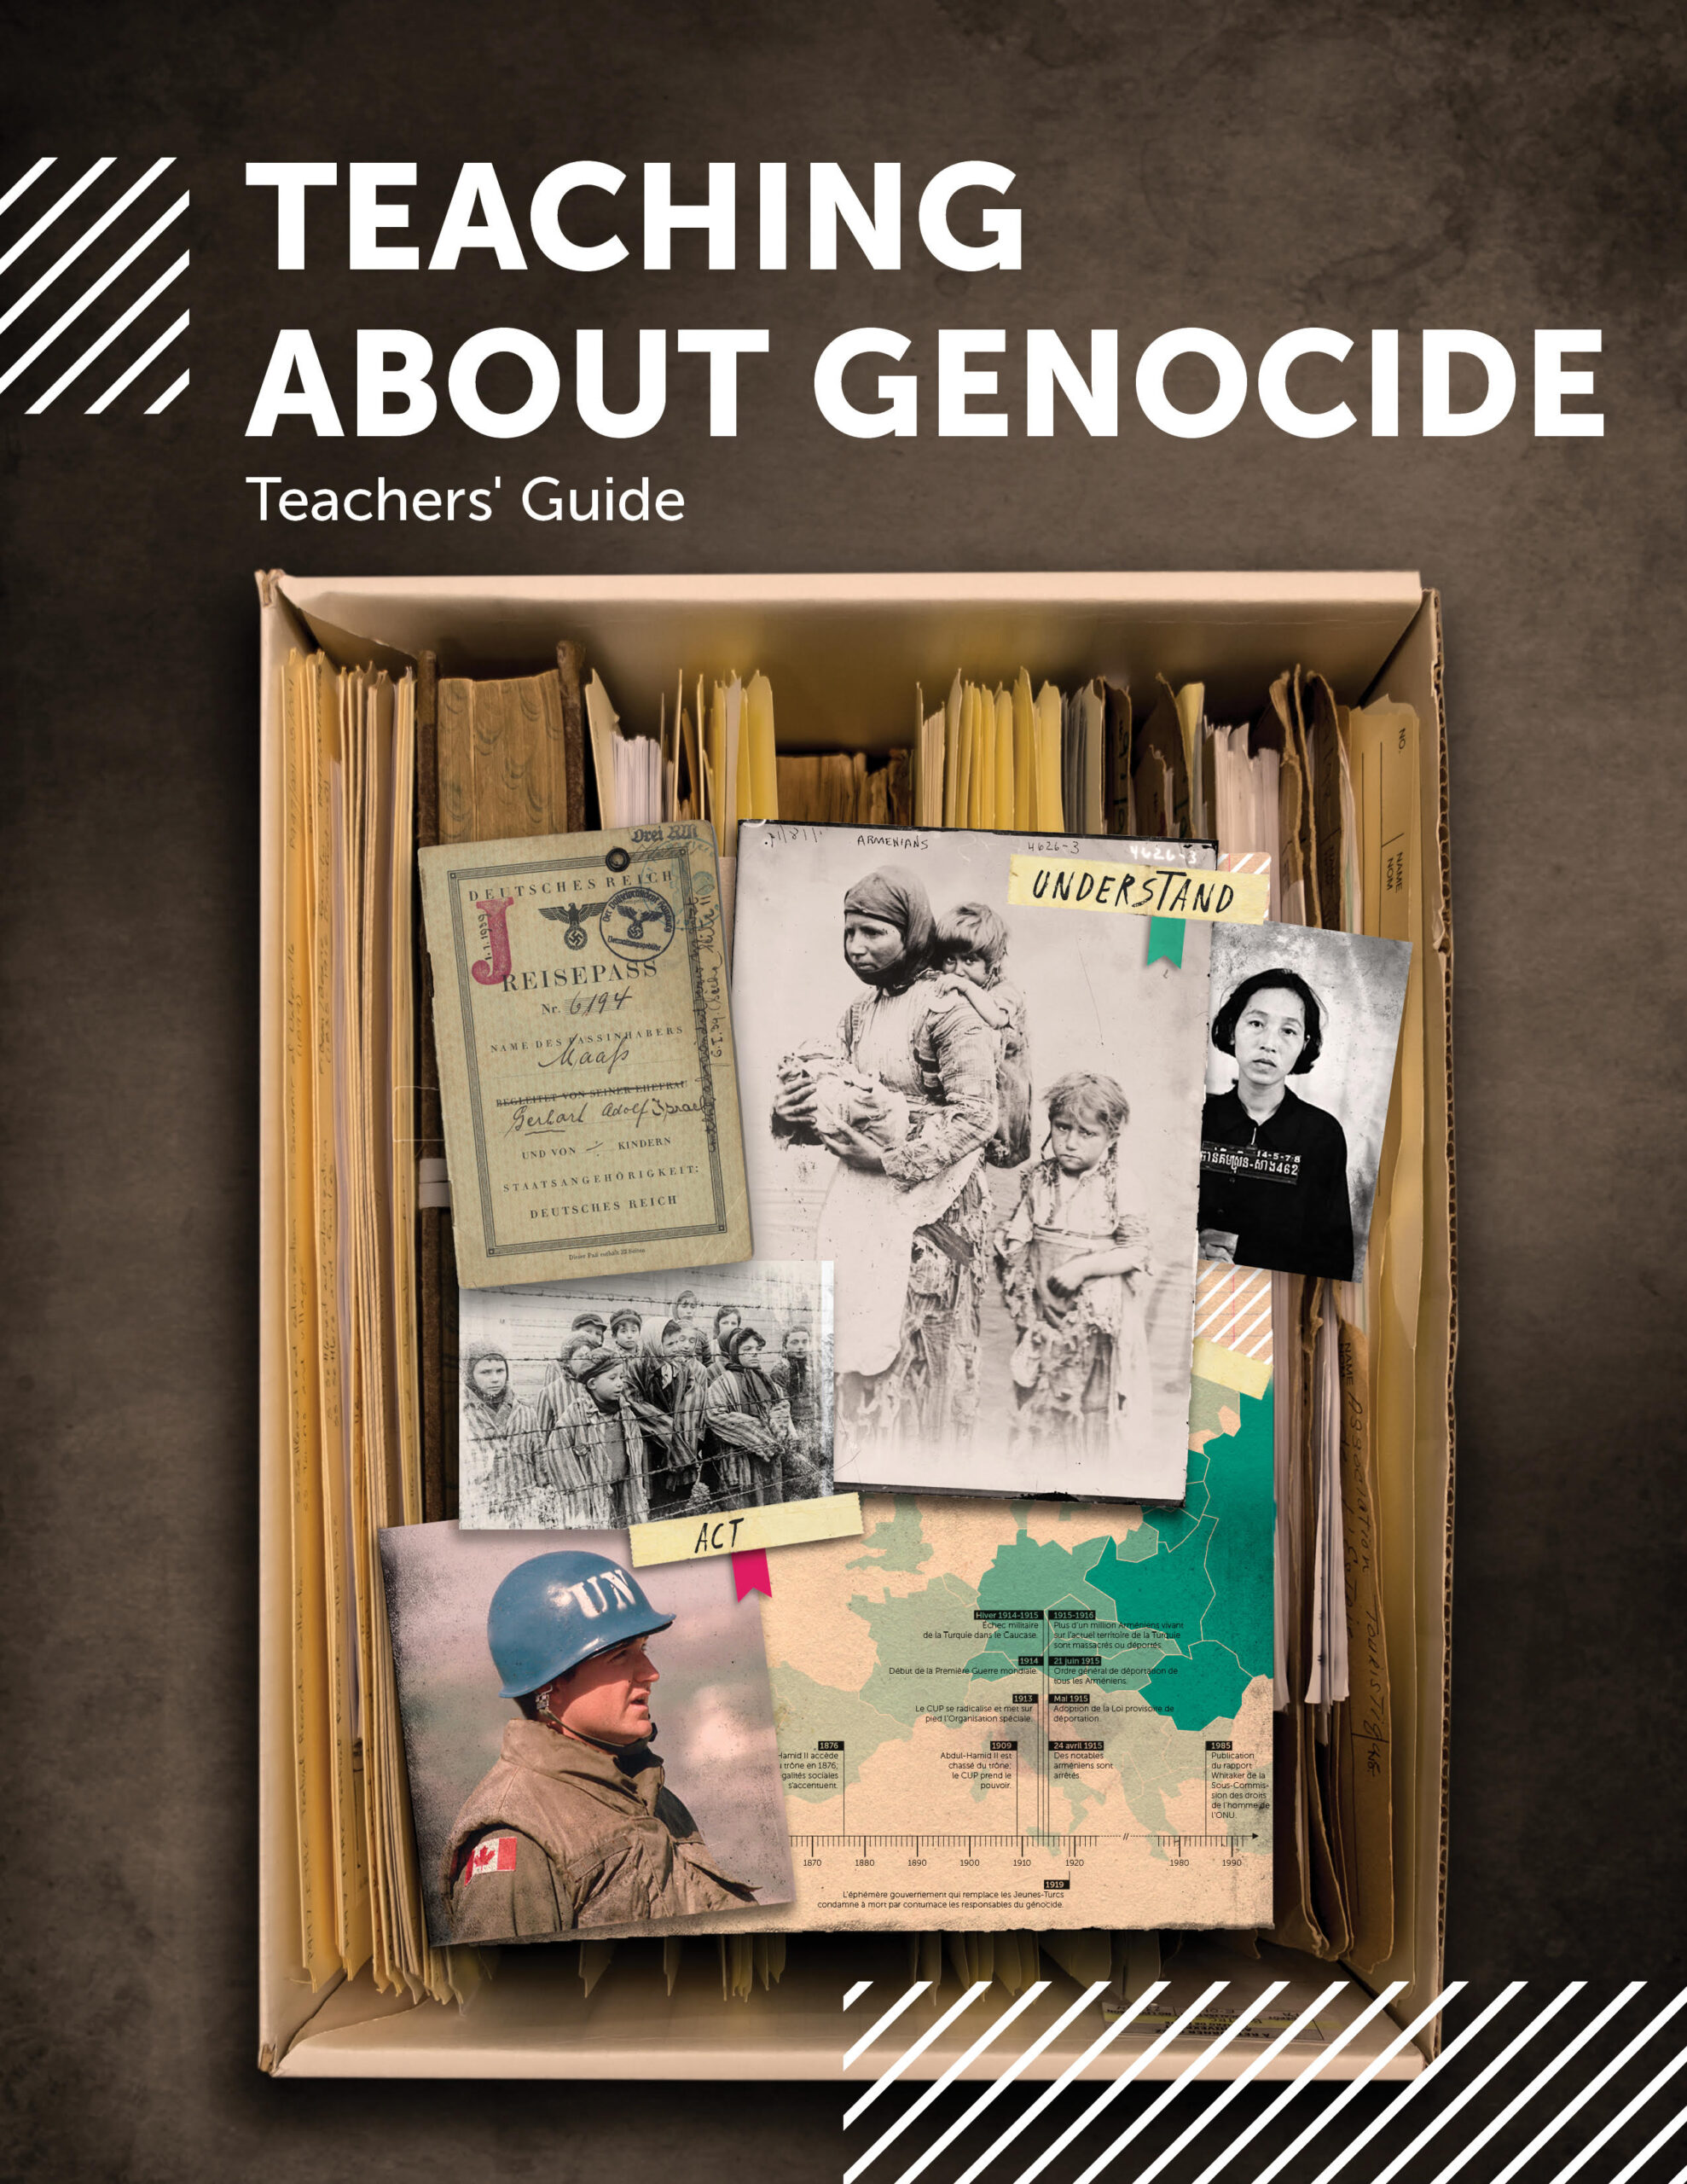 Canada’s first guide to teaching about genocide is launched in Quebec high schools